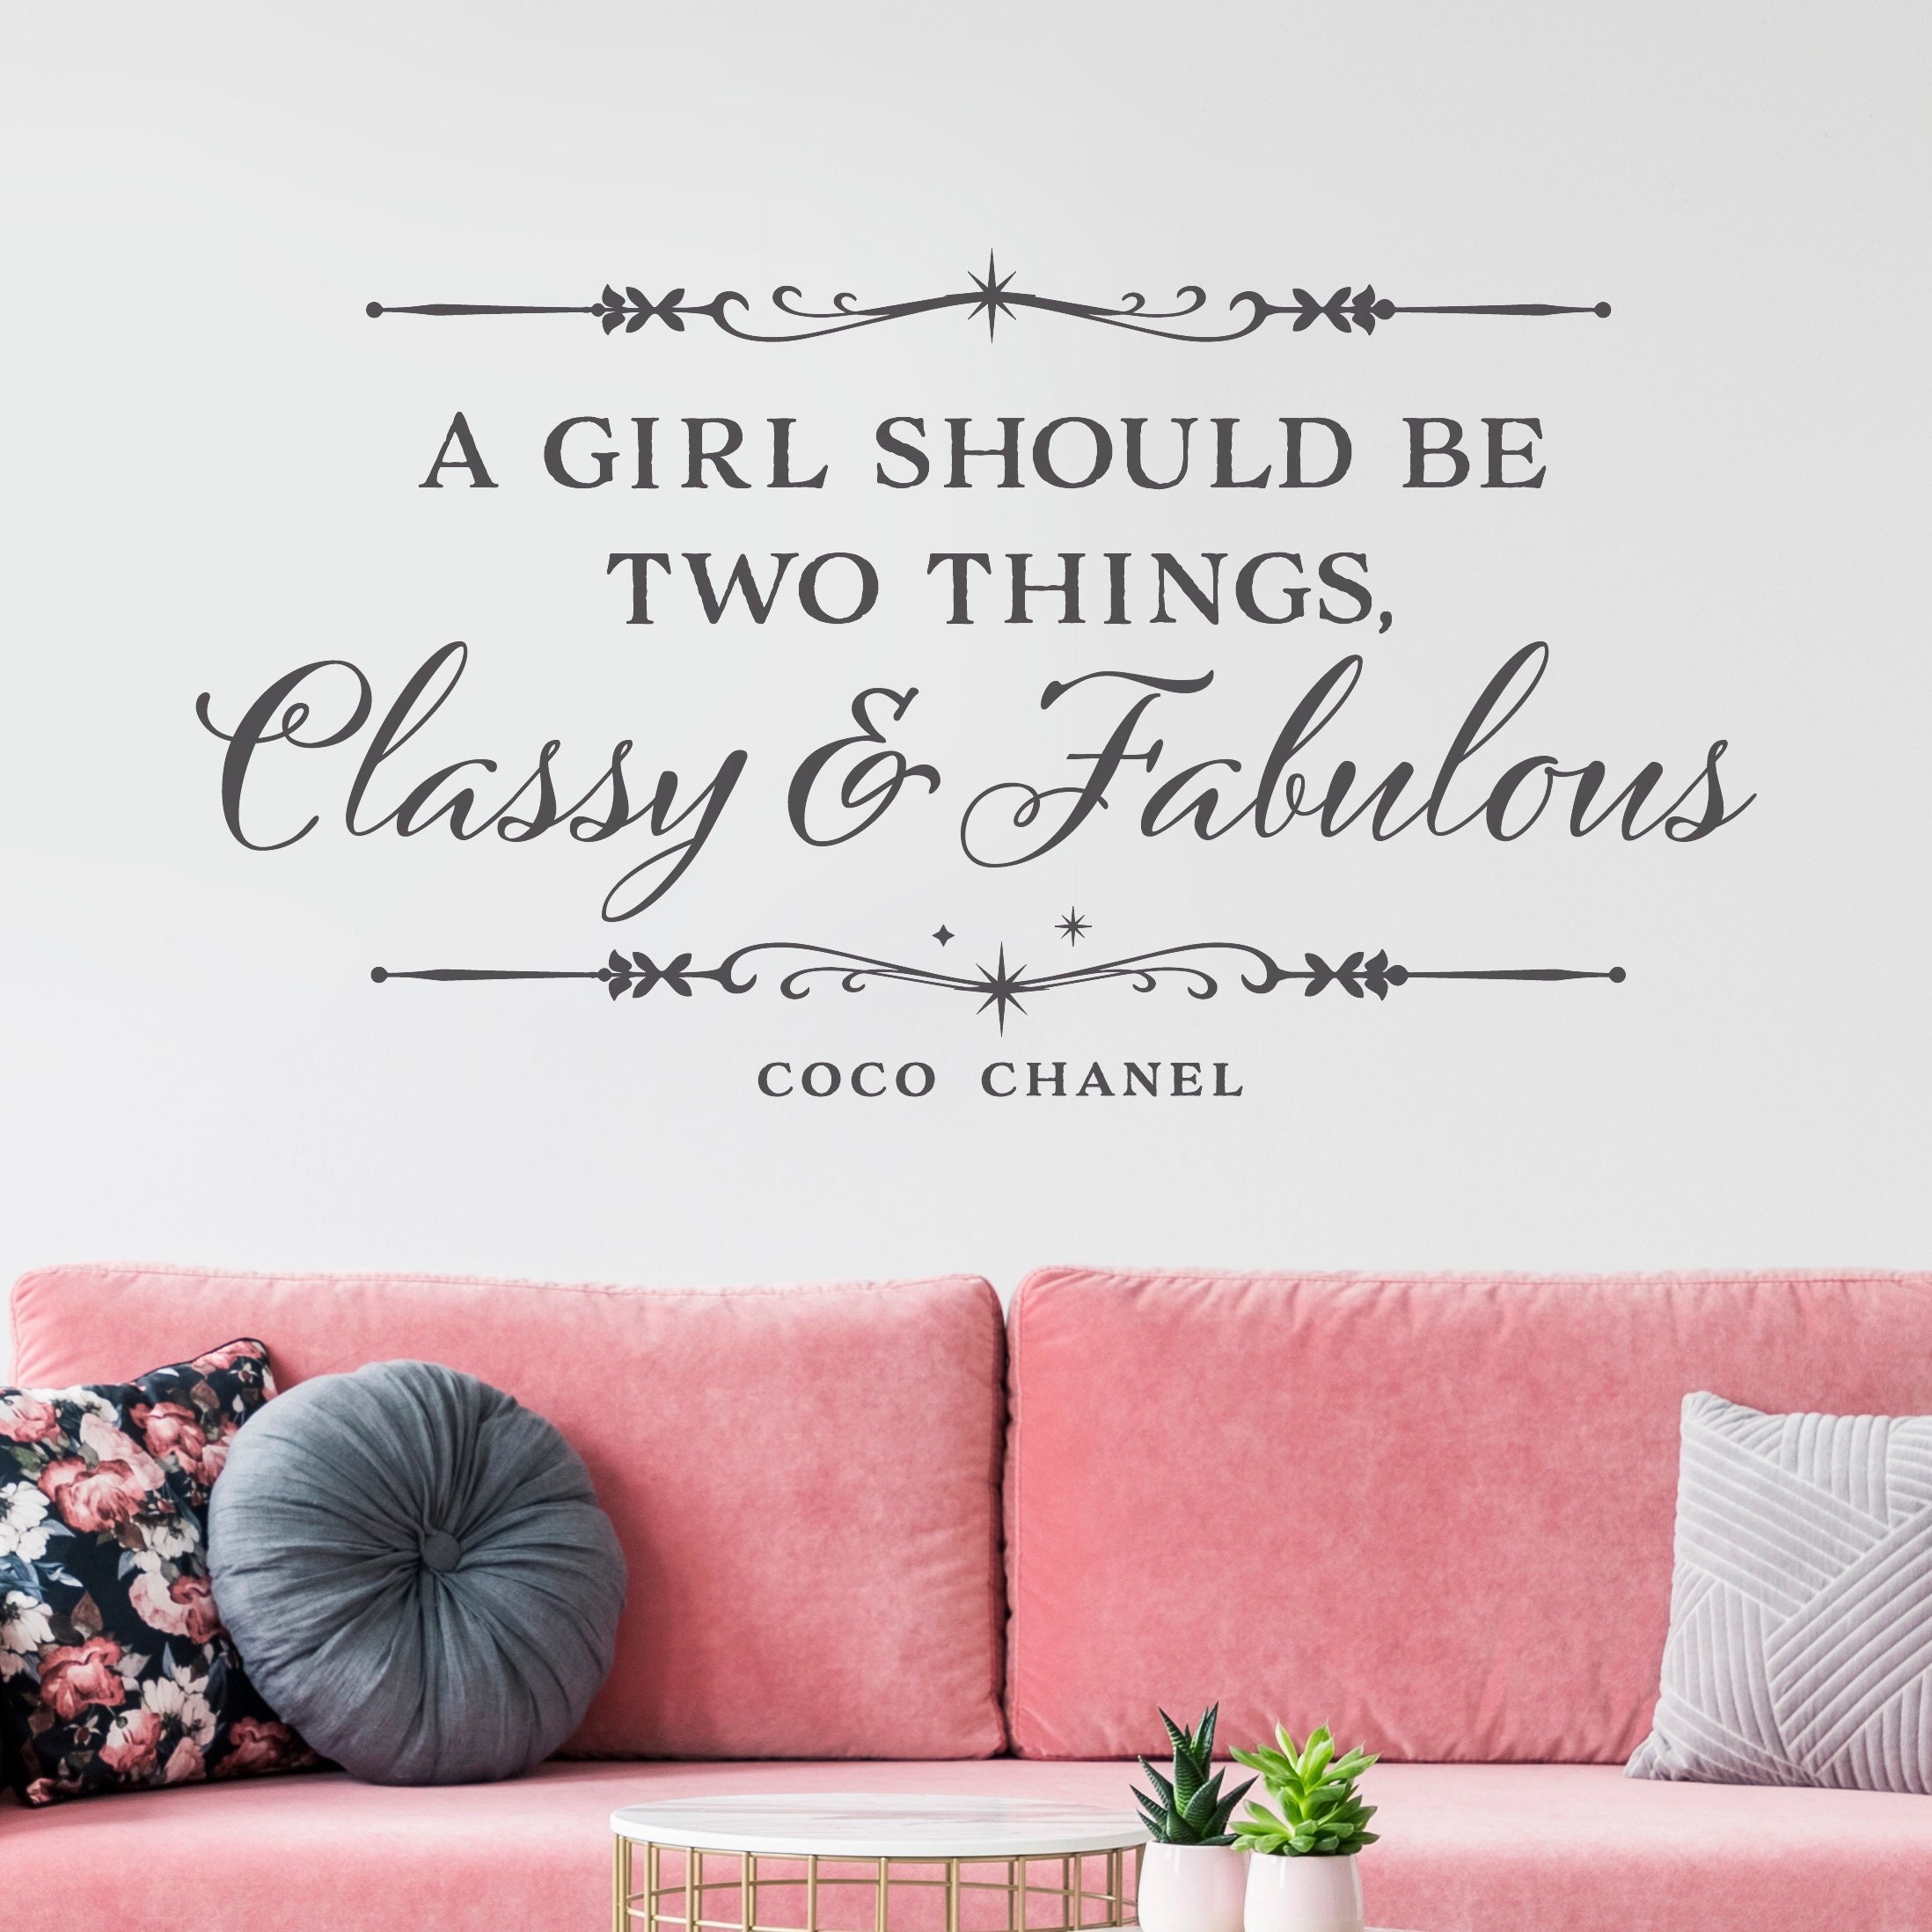 Inspirational Wall Stickers Quotes Vinyl Eyes Eyelash Wall Decals Motivational Sayings for Wall Art Decor Sticker Positive Lettering Wall Decal for